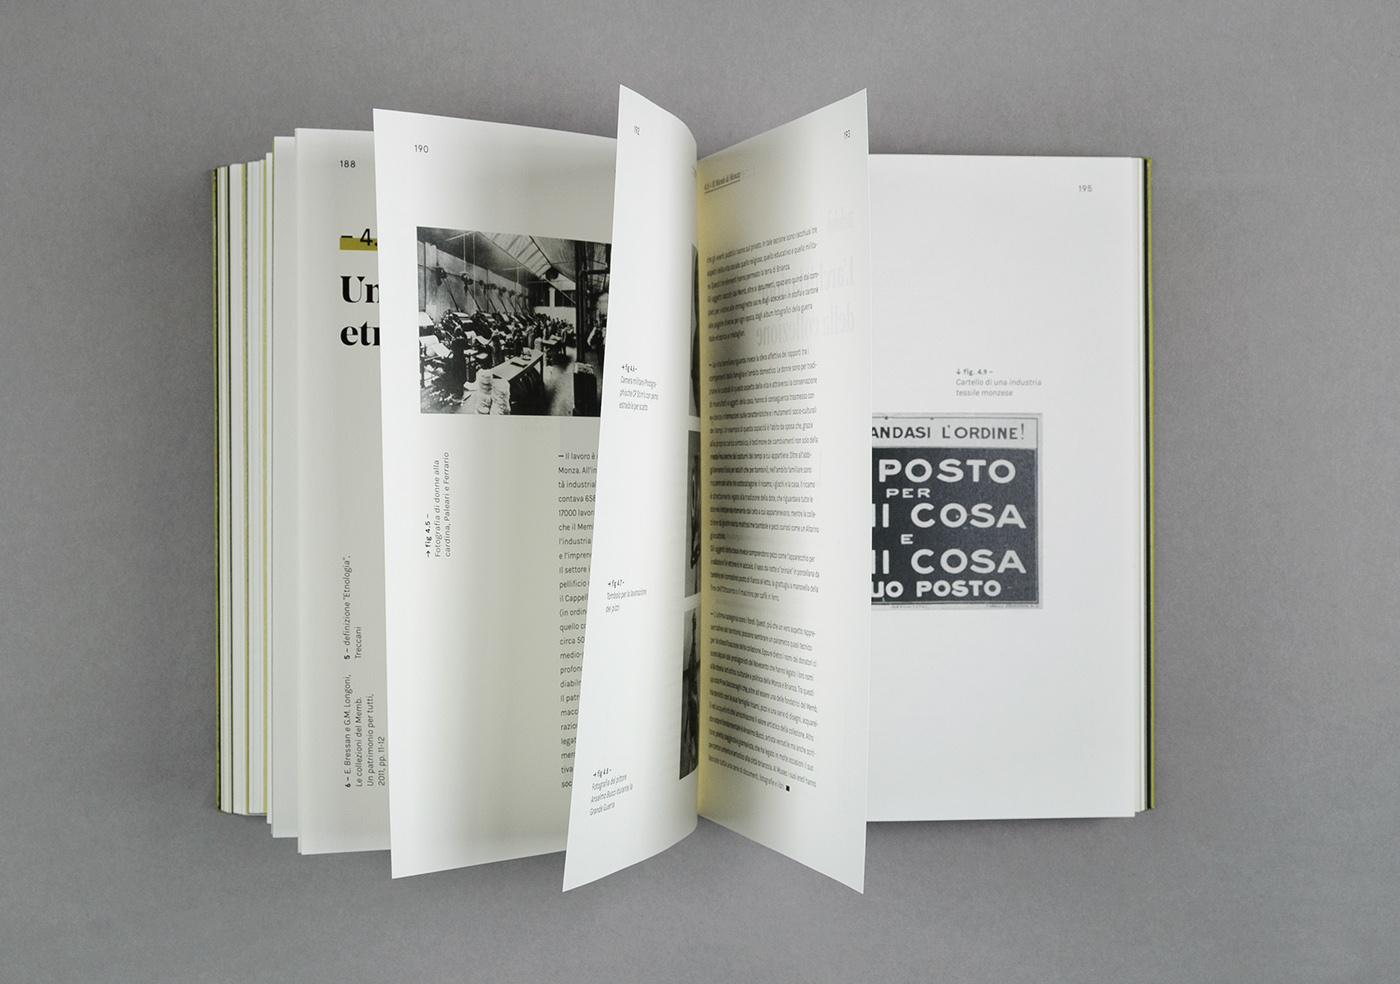 museum box thesis Master museo book editorial public